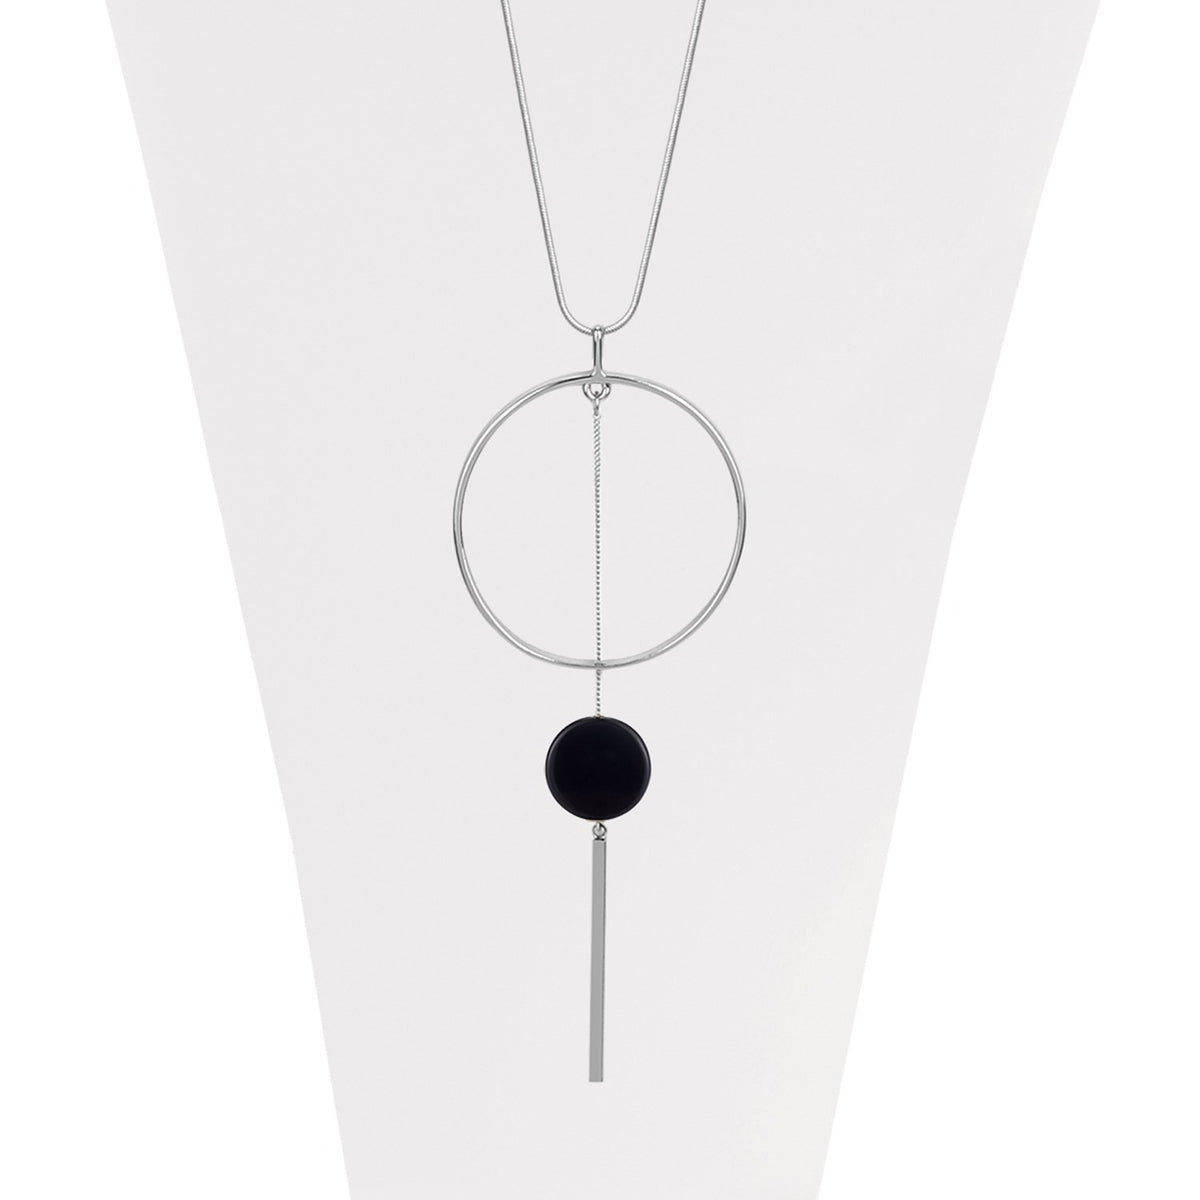 Silver adjustable necklace with thin ring, stick and black dot pendants